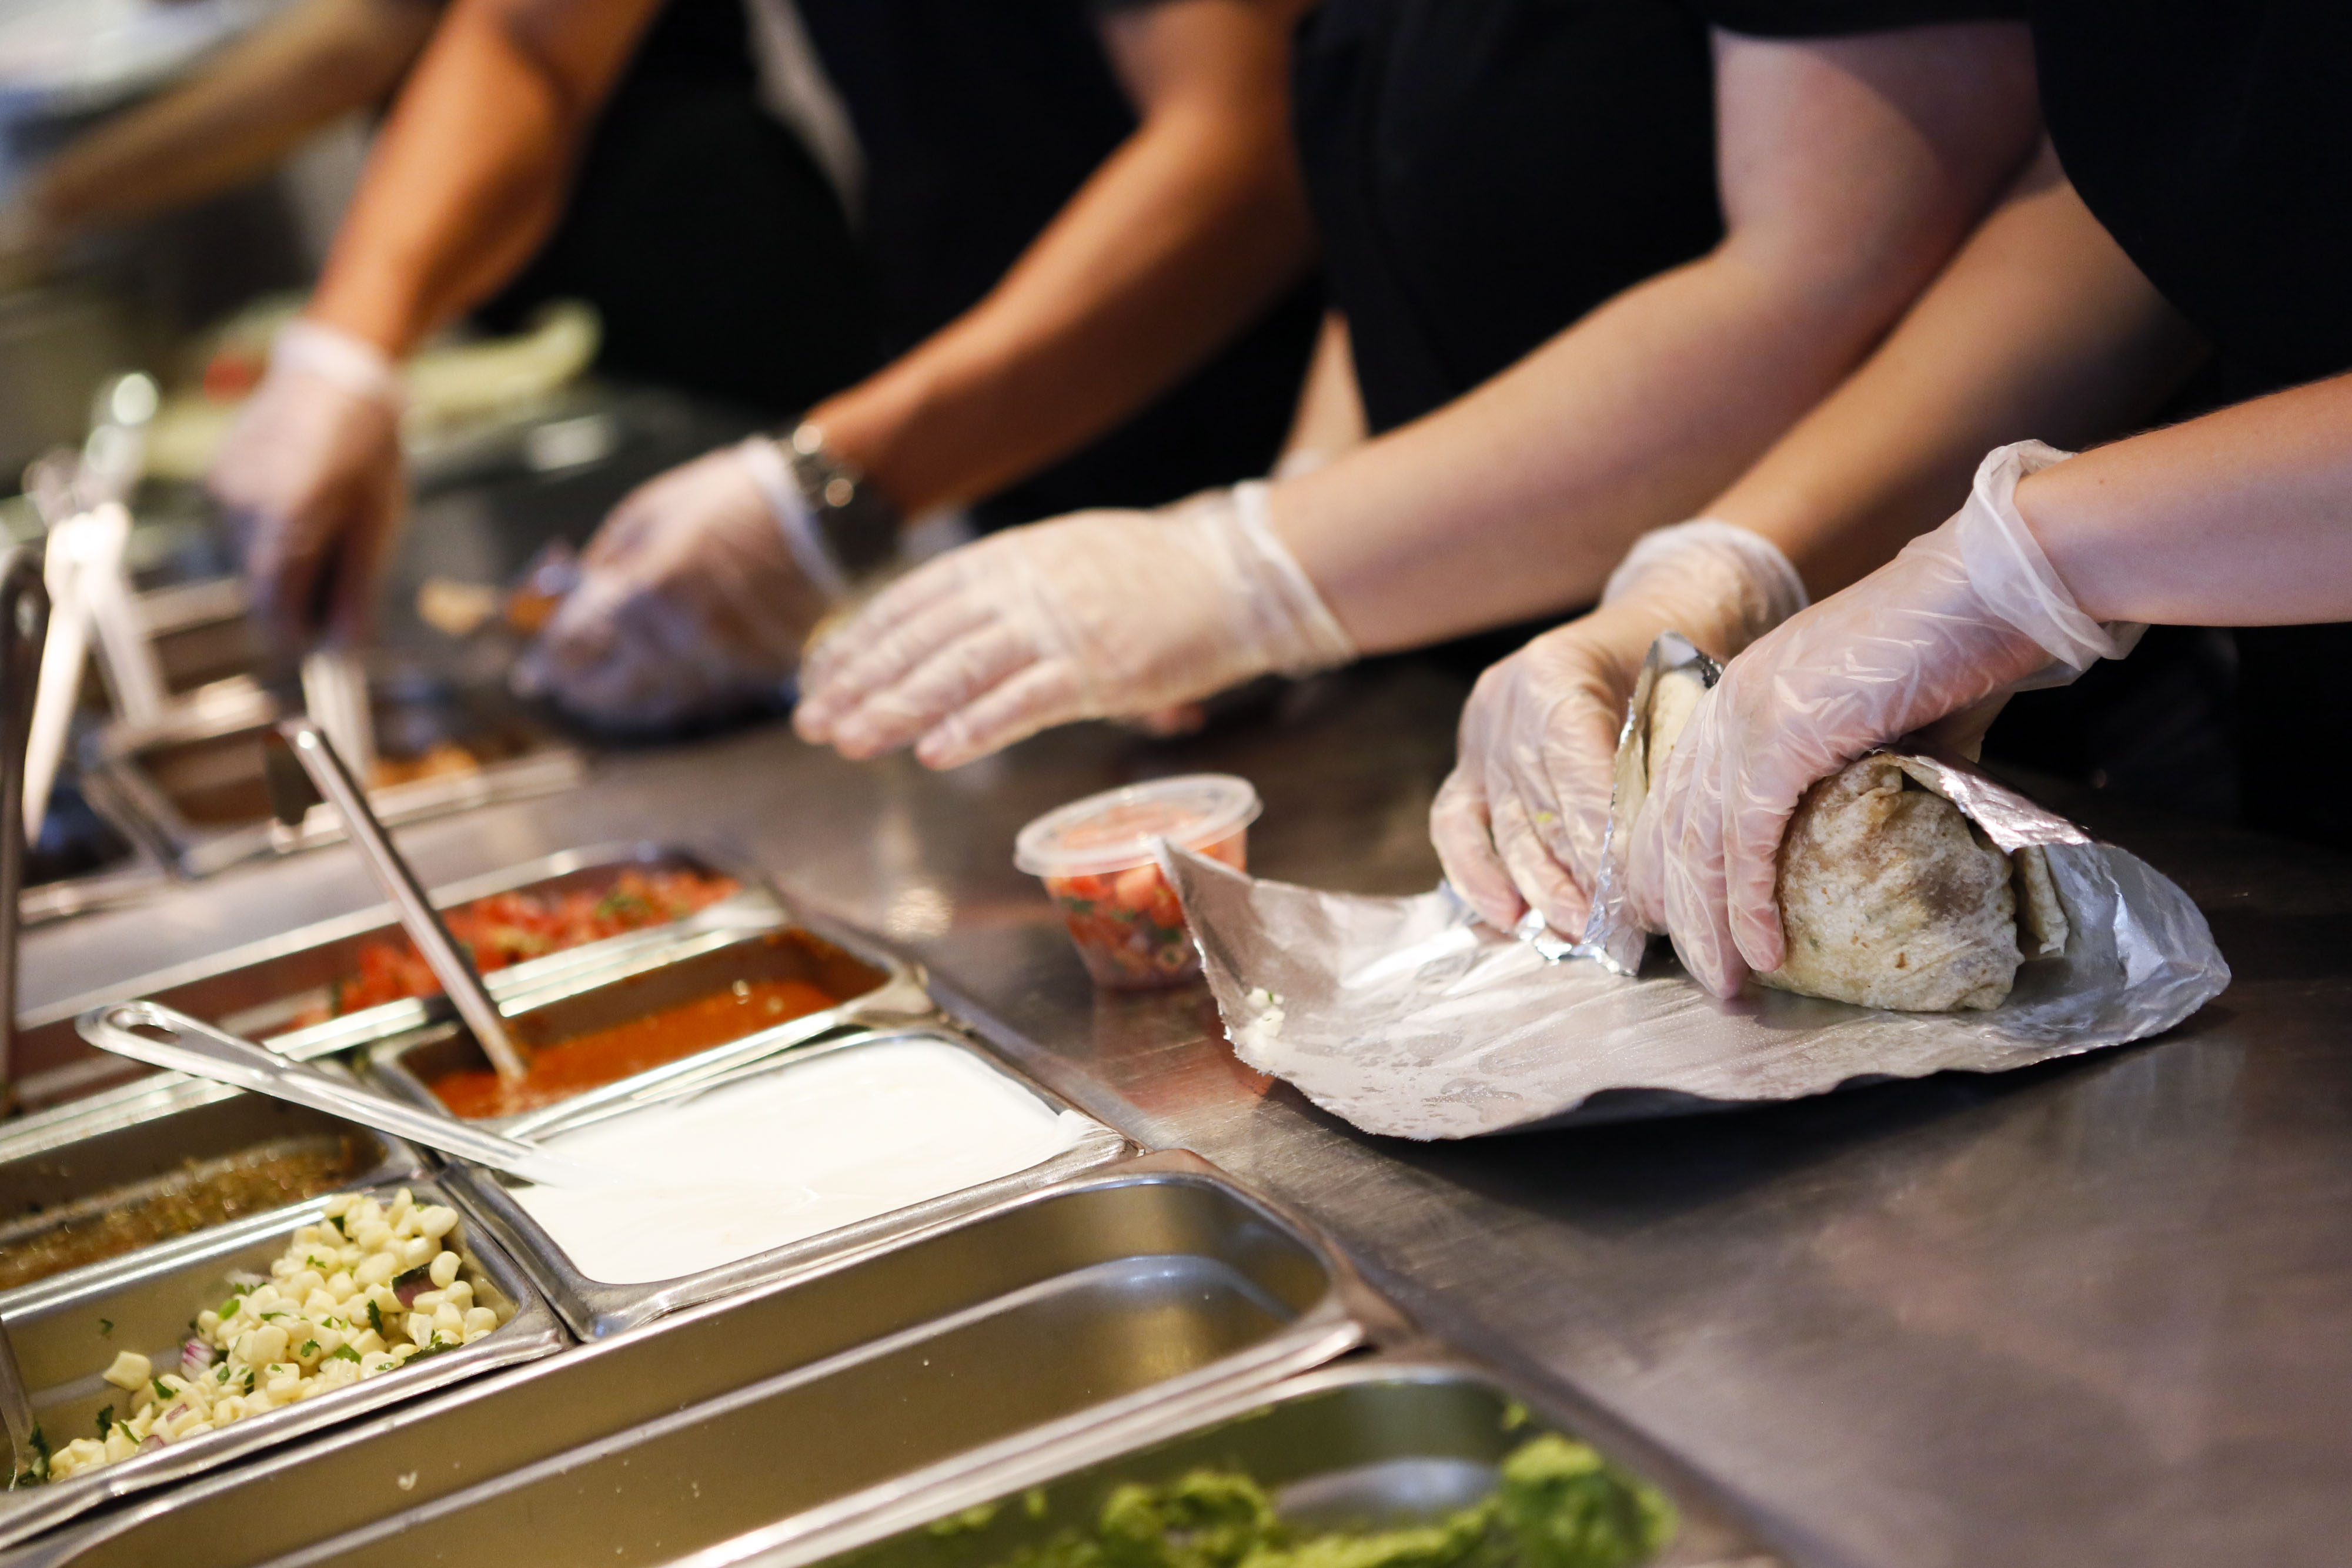 Chipotle Will Raise Average Wage to $15 an Hour - The New York Times